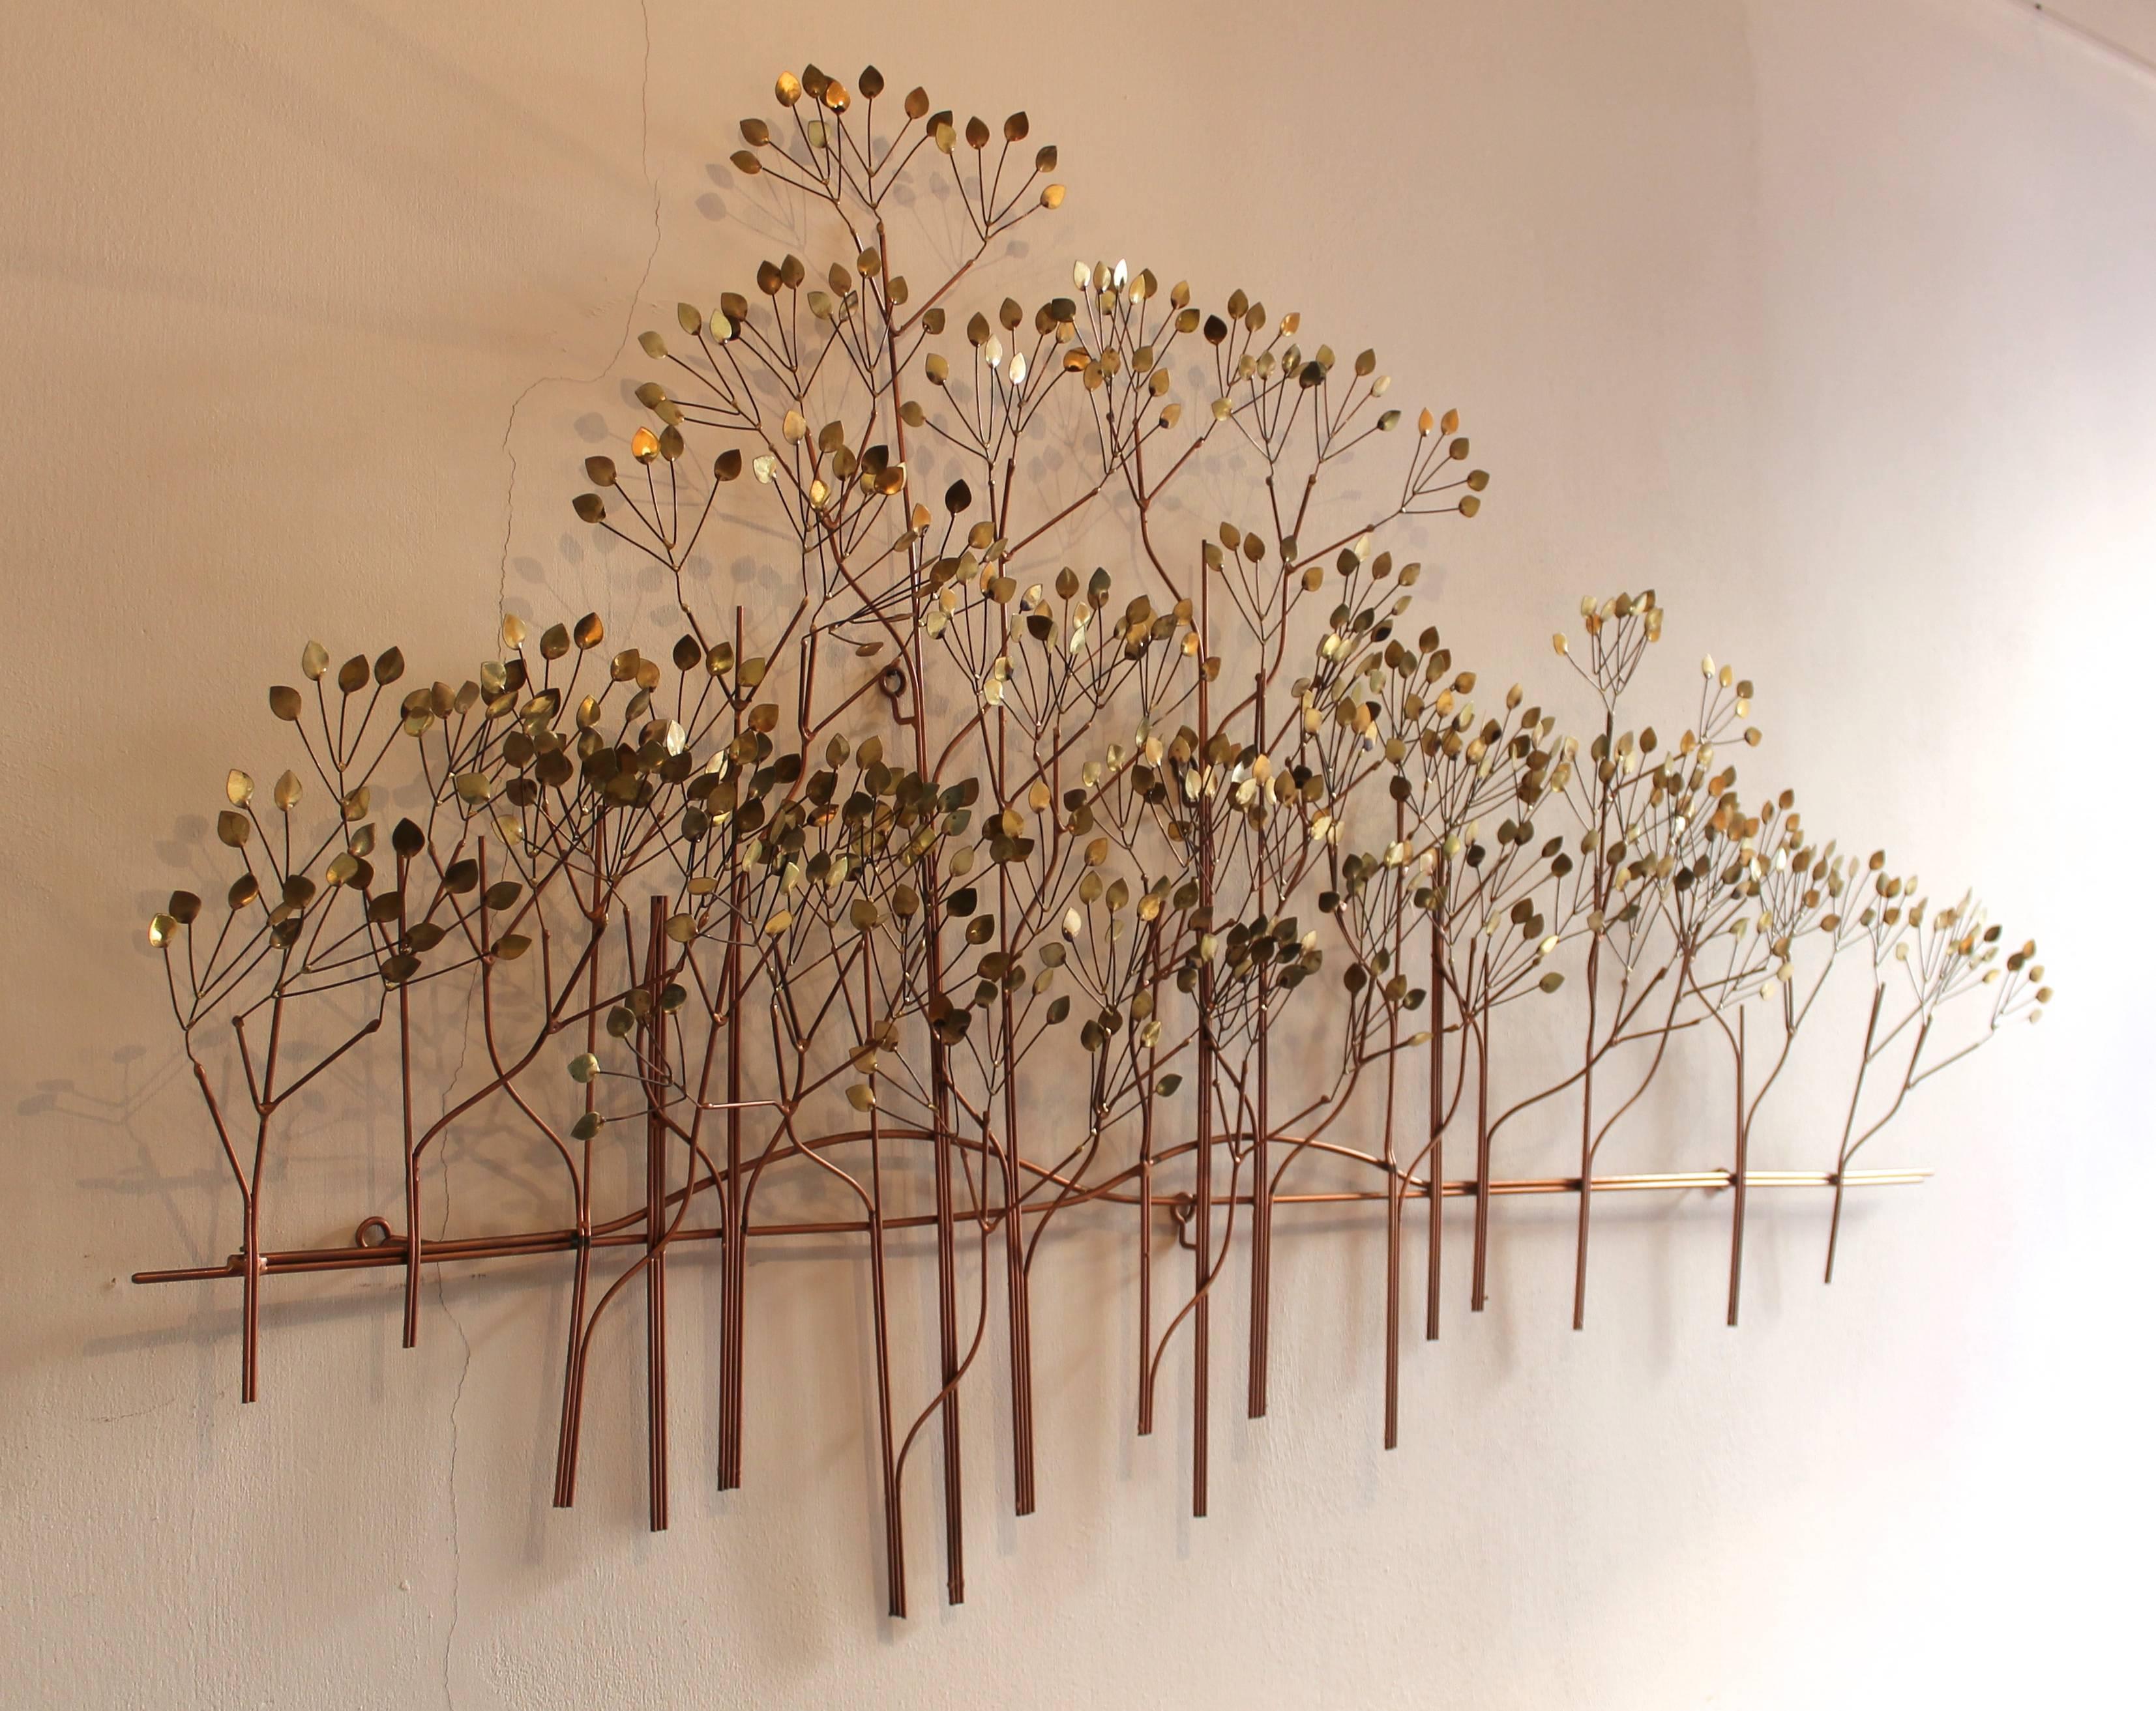 Trees by Curtis Jeré (US) in brass.

Wikipedia: 
C. Jere is a metalwork artist of wall sculptures and household accessories.
C. Jere works are made and marketed by the corporation Artisan House. Curtis Jere is a compound nom-de-plume of artists